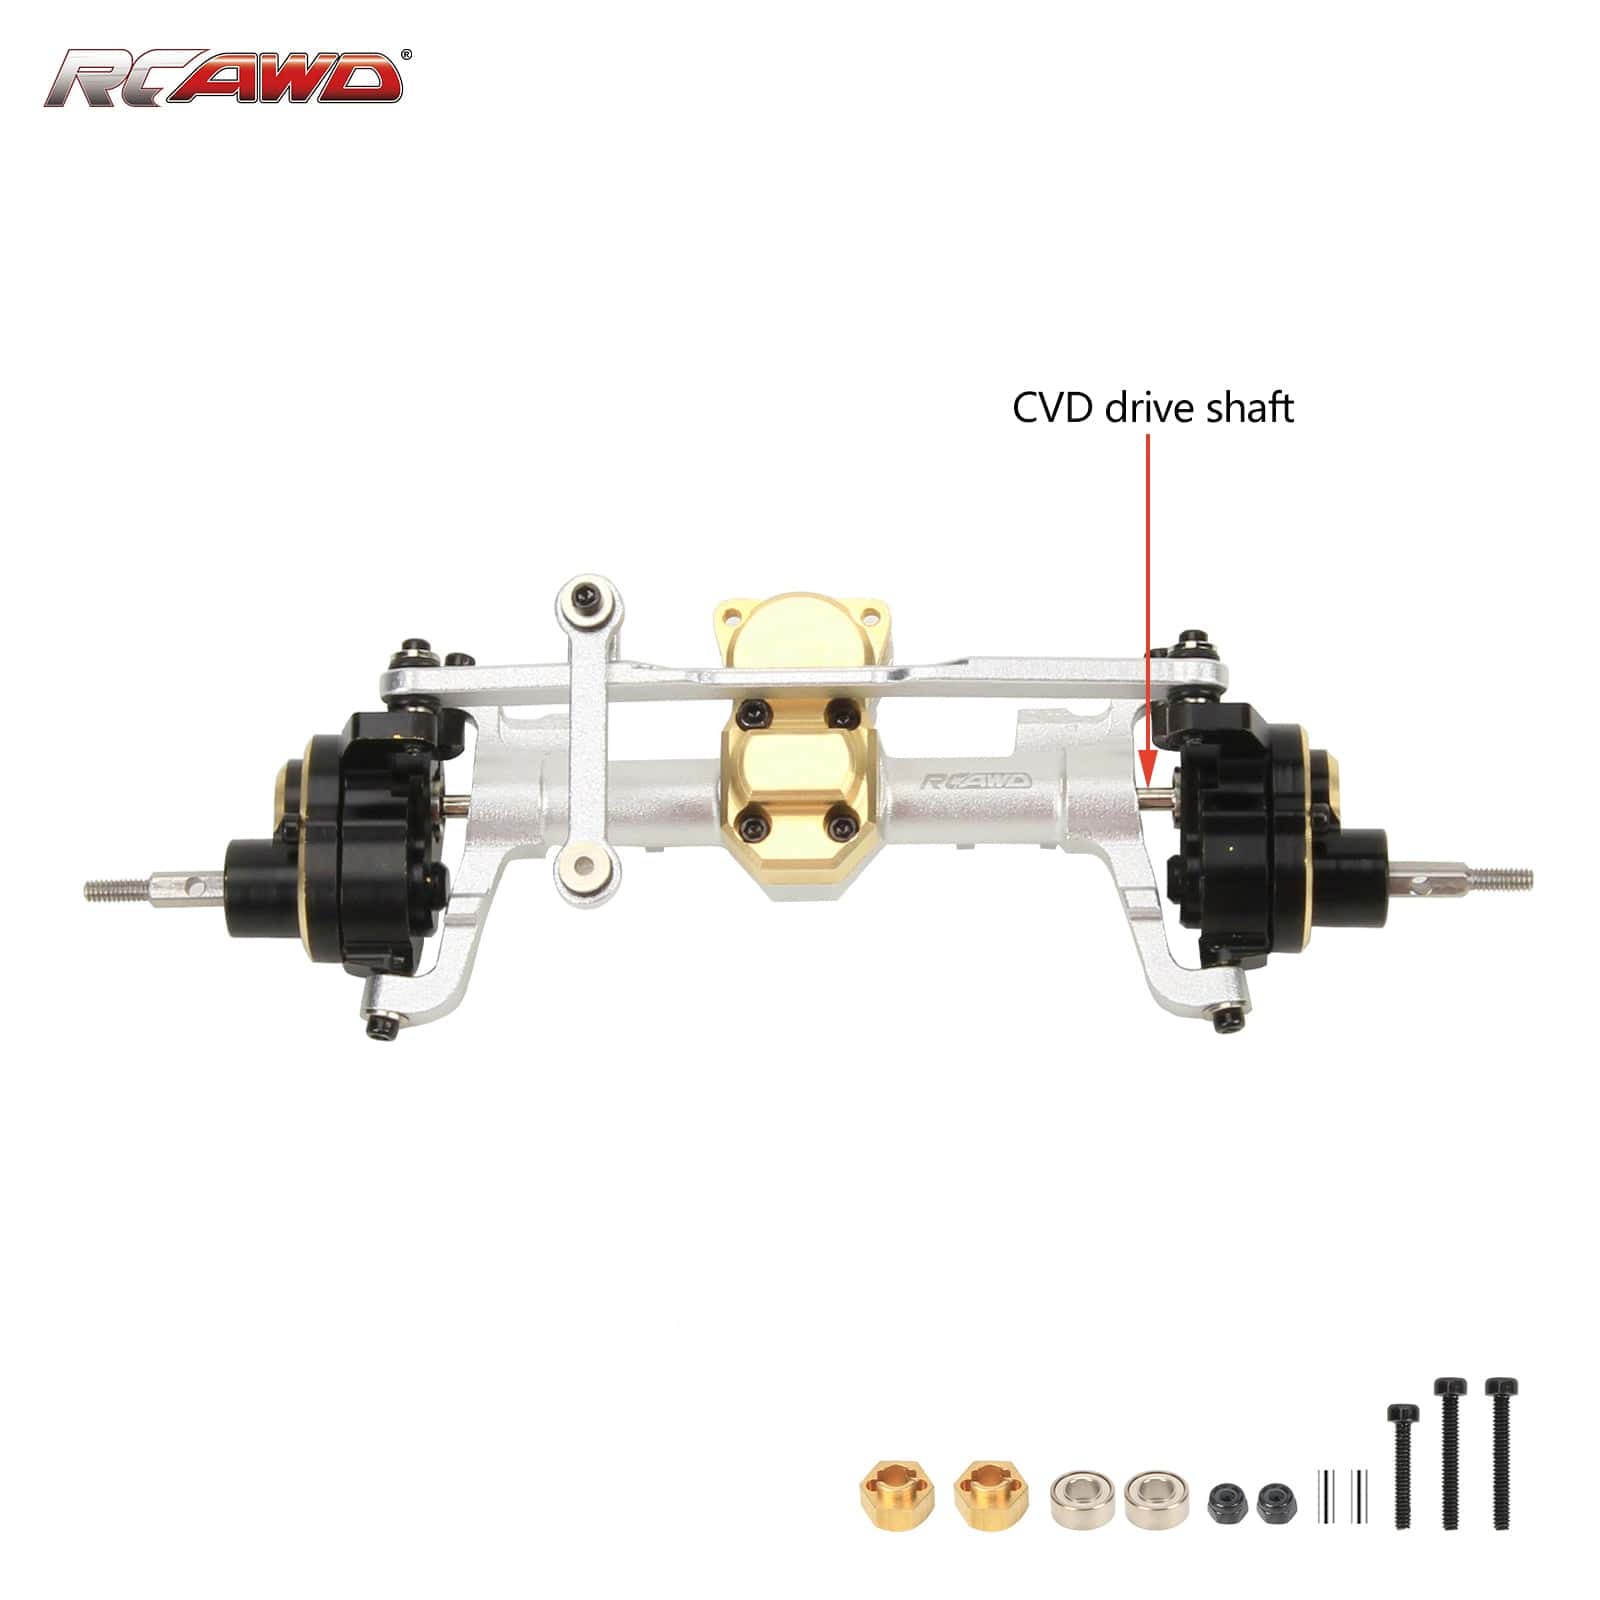 RCAWD Silver / CVD RCAWD full metal front CVD portal axle for 1/24  Axial SCX24 crawlers